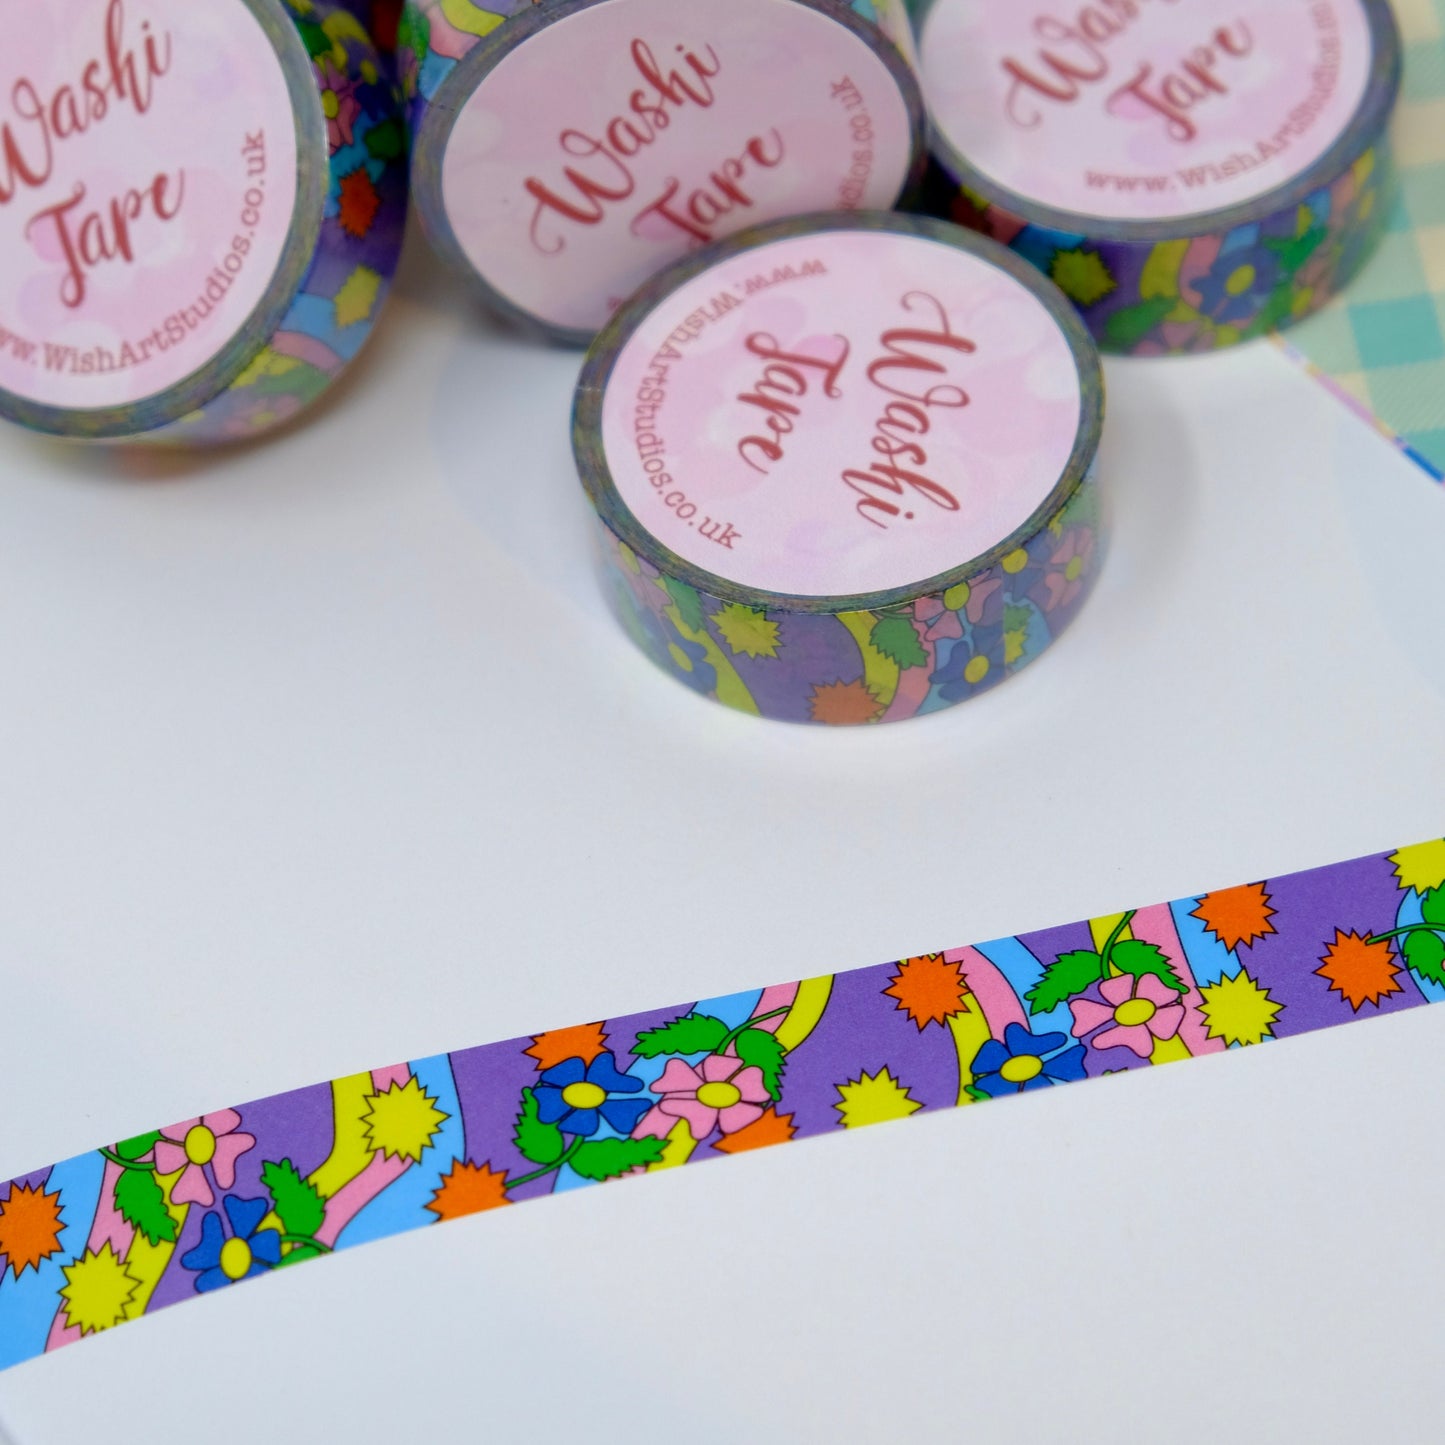 Purple Washi Tape With Stars and Flowers - Illustrated Washi Paper Tape - Bright And Colourful Stationary Tape for Bullet Journalling